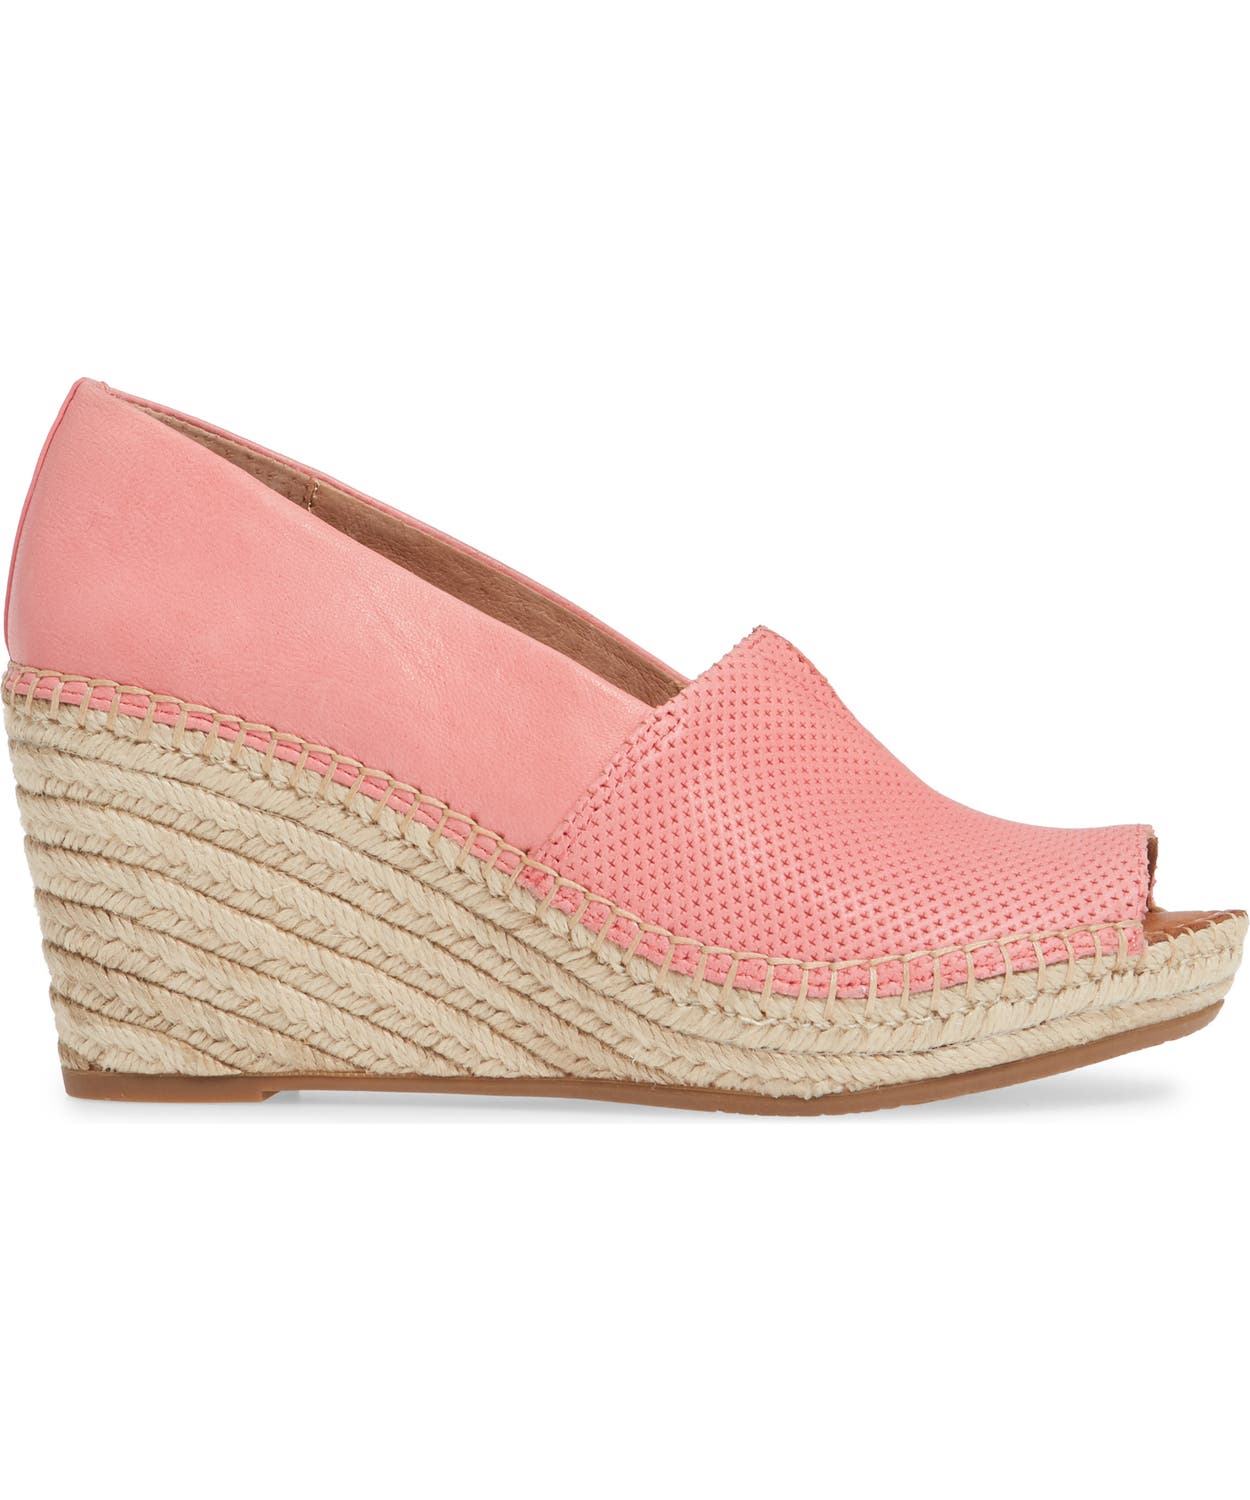 woocommerce-673321-2209615.cloudwaysapps.com-gentle-souls-by-kenneth-cole-womens-pink-leather-charli-espadrille-wedges